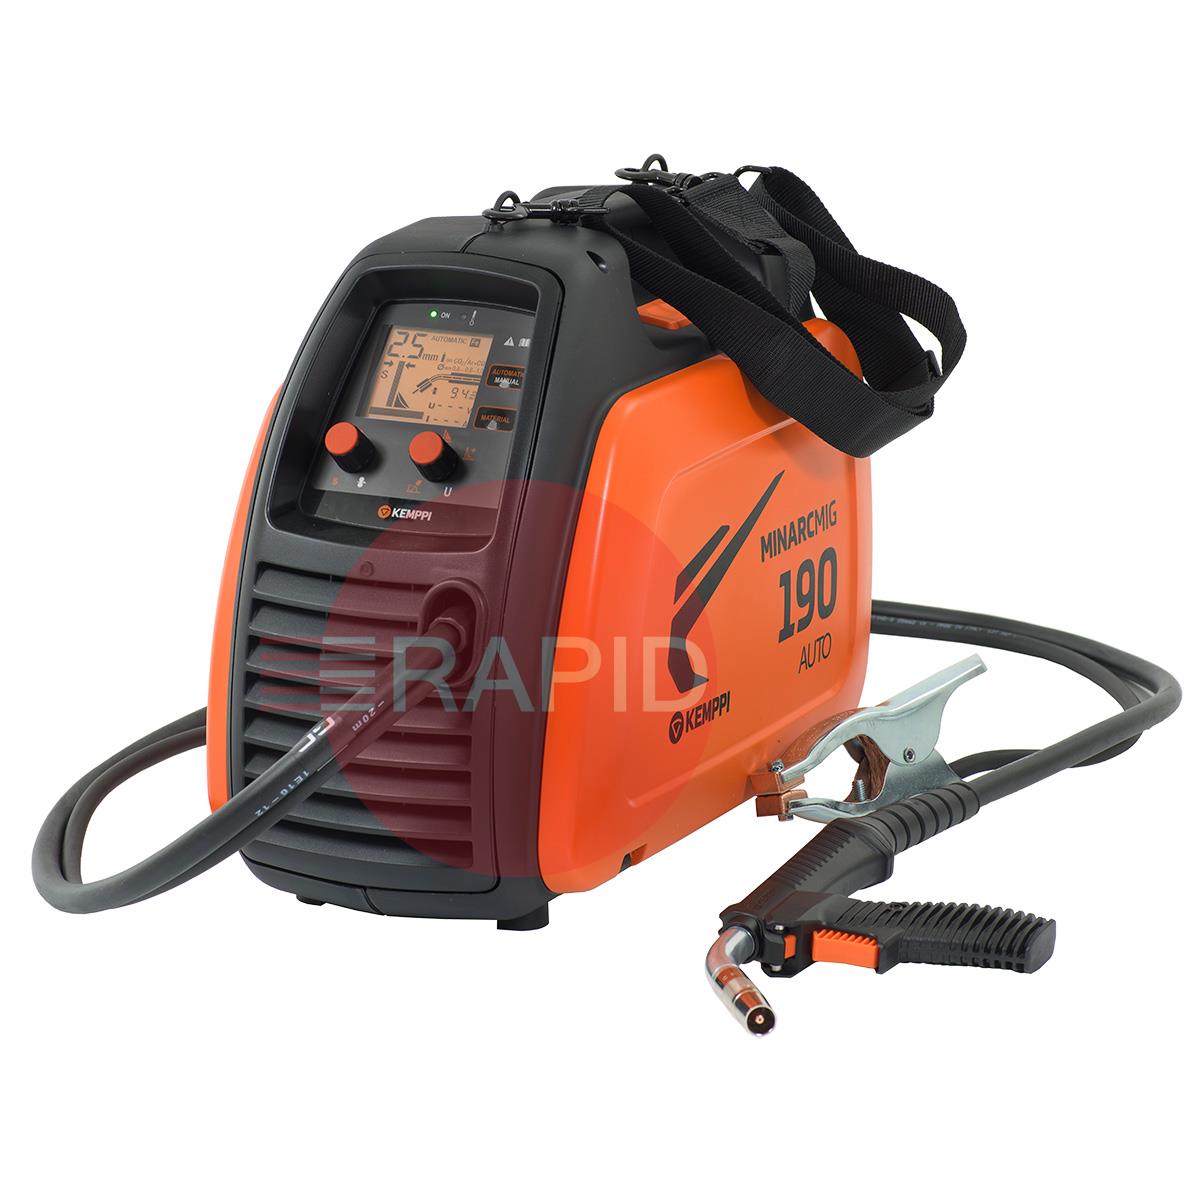 61008190  Kemppi MinarcMig 190 Auto MIG Package, 230v CE. Includes GC 223G MIG Torch, Earth & Gas Hose